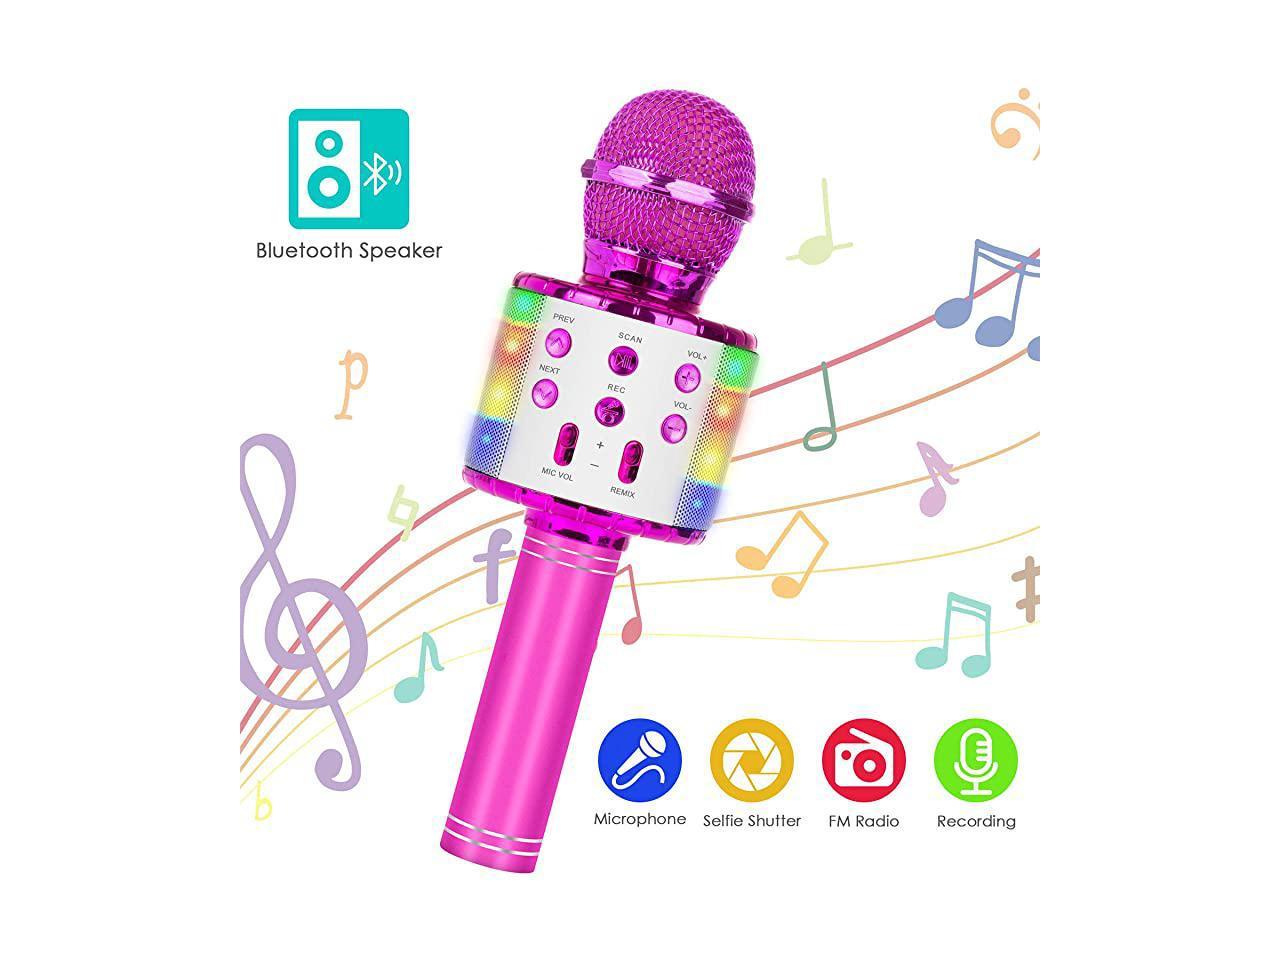 Great Gifts Toys Home KTV Adults Birthday Party Bluetooth Wireless Karaoke Microphone with LED Lights 5 in 1 Portable Mic Speaker Player Recorder for Kids Girls Red Boys 